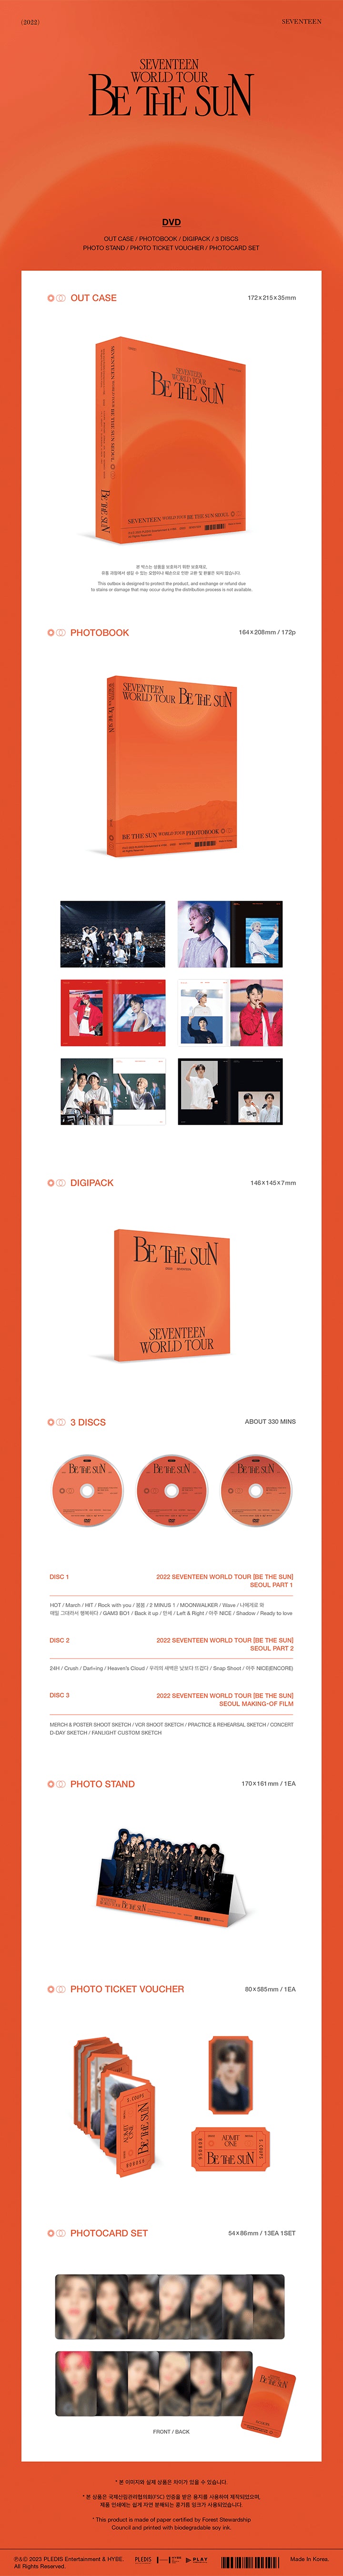 3 DVDs
1 Photo Book (172 pages)
1 Photo Stand
1 Photo Ticket Voucher
13 Photo Cards